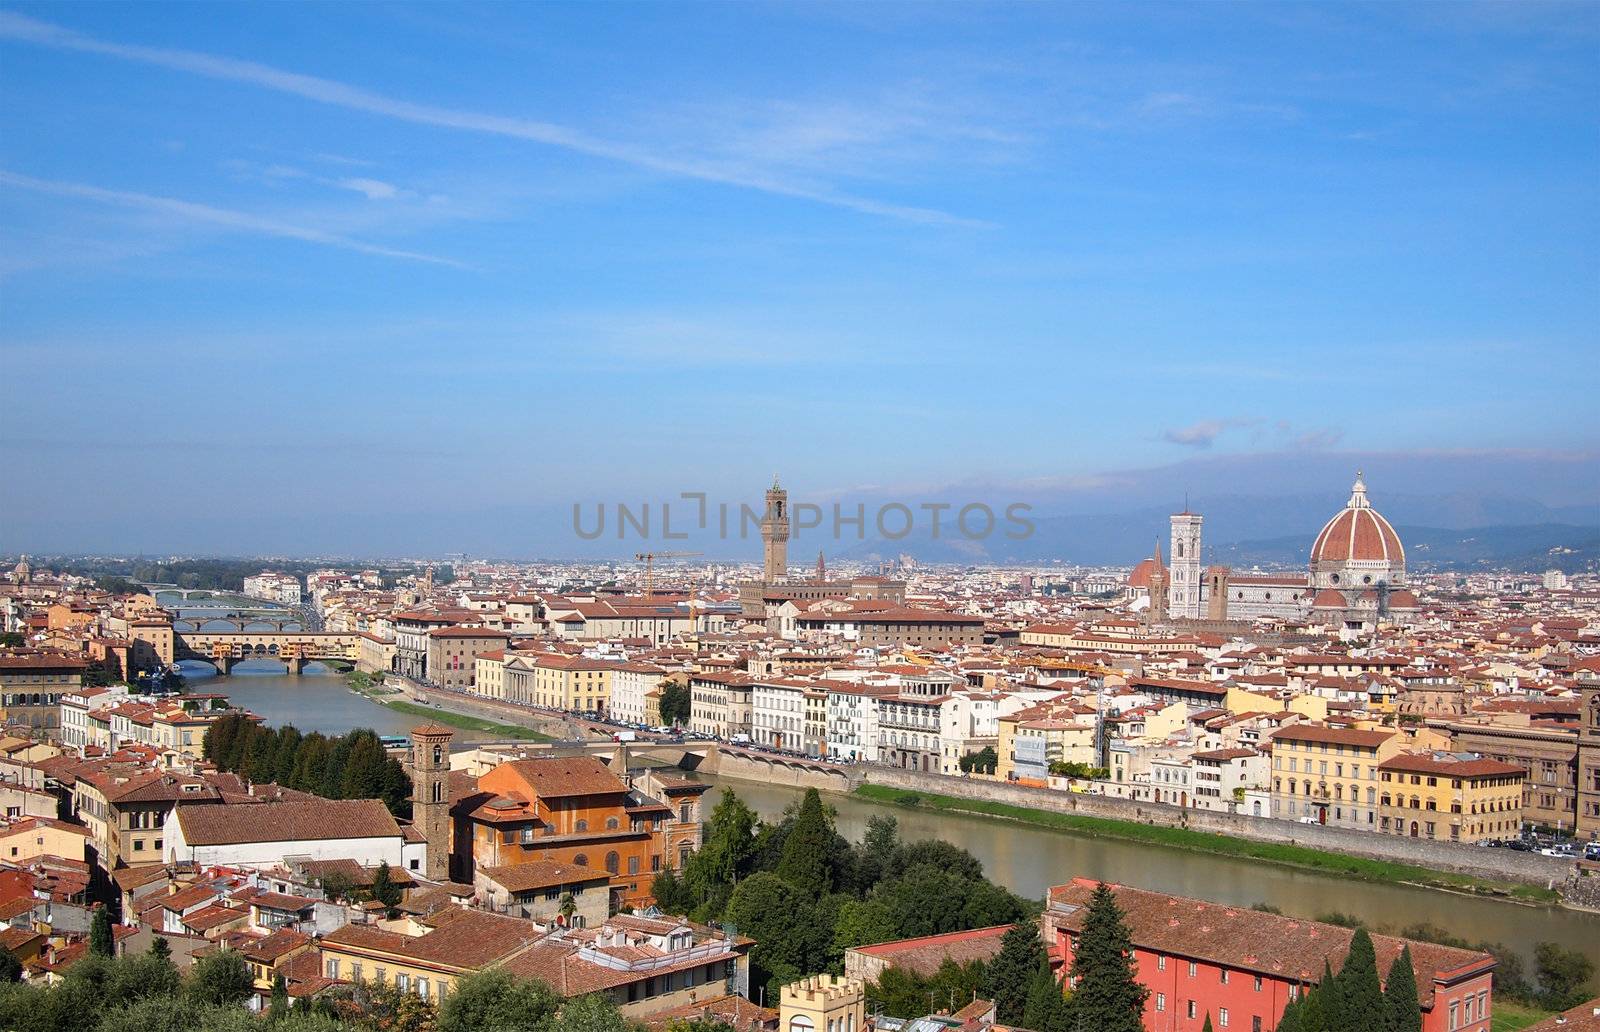 Overview over Florence, Italy, including cathedral and ponte vecchio.